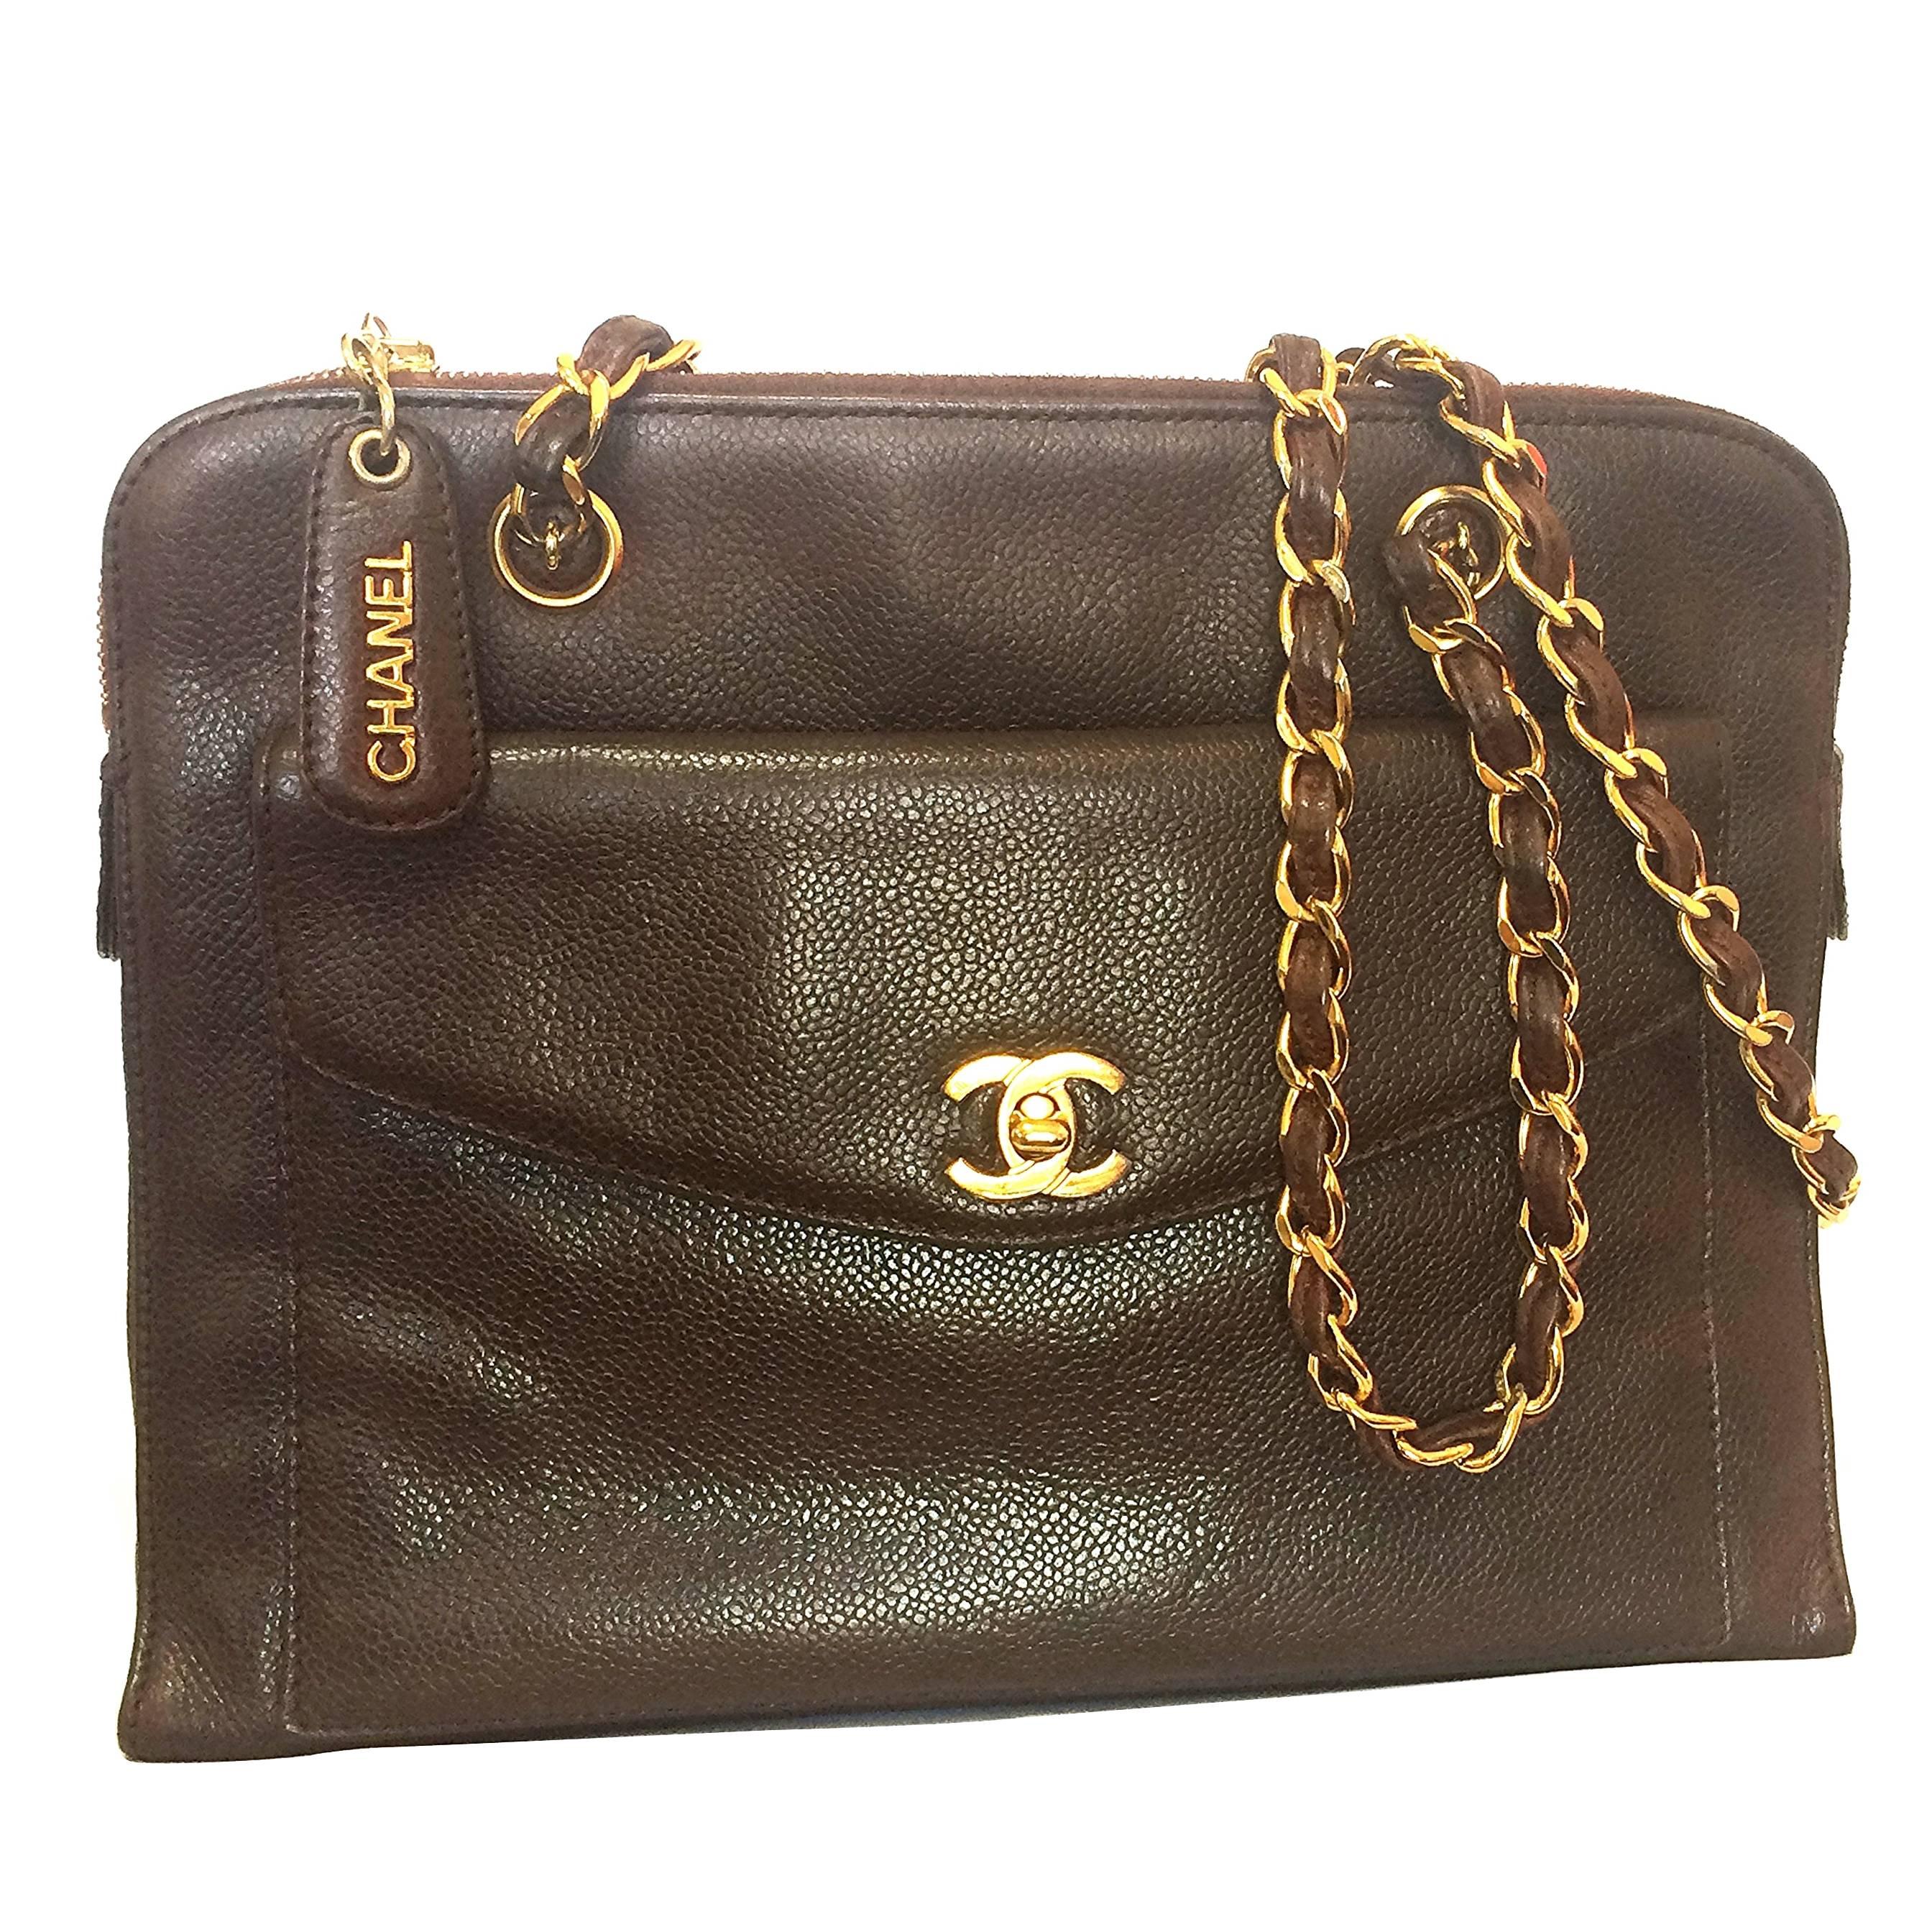 Vintage CHANEL dark brown caviar leather chain shoulder tote bag with golden CC. For Sale